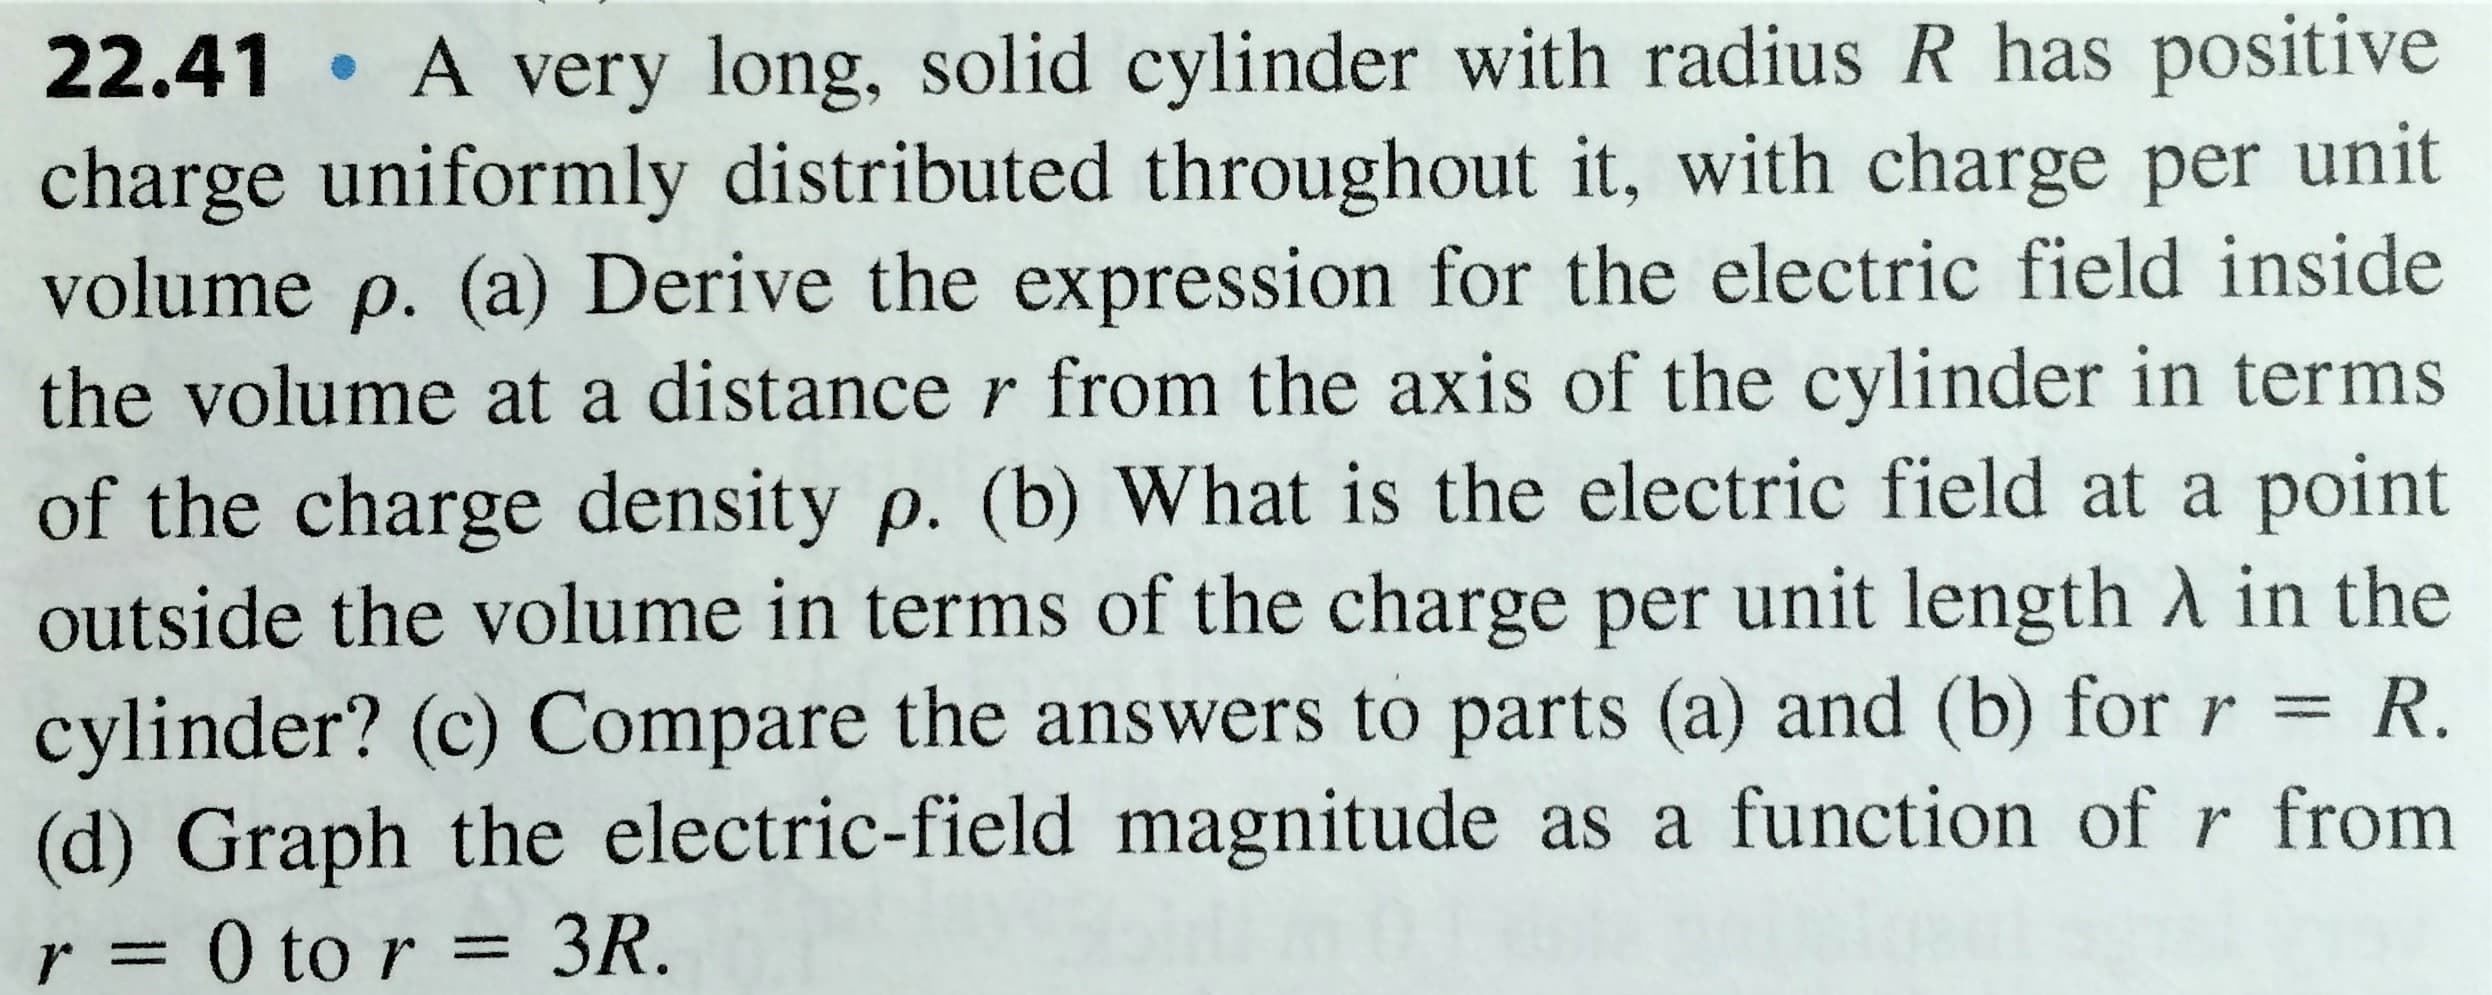 22.41 A very long, solid cylinder with radius R has positive
charge uniformly distributed throughout it, with charge per unit
volume p. (a) Derive the expression for the electric field inside
the volume at a distance r from the axis of the cylinder in terms
of the charge density p. (b) What is the electric field at a point
outside the volume in terms of the charge per unit length A in the
cylinder? (c) Compare the answers to parts (a) and (b) forr = R.
(d) Graph the electric-field magnitude as a function of r from
3R.
r= 0 to r =
